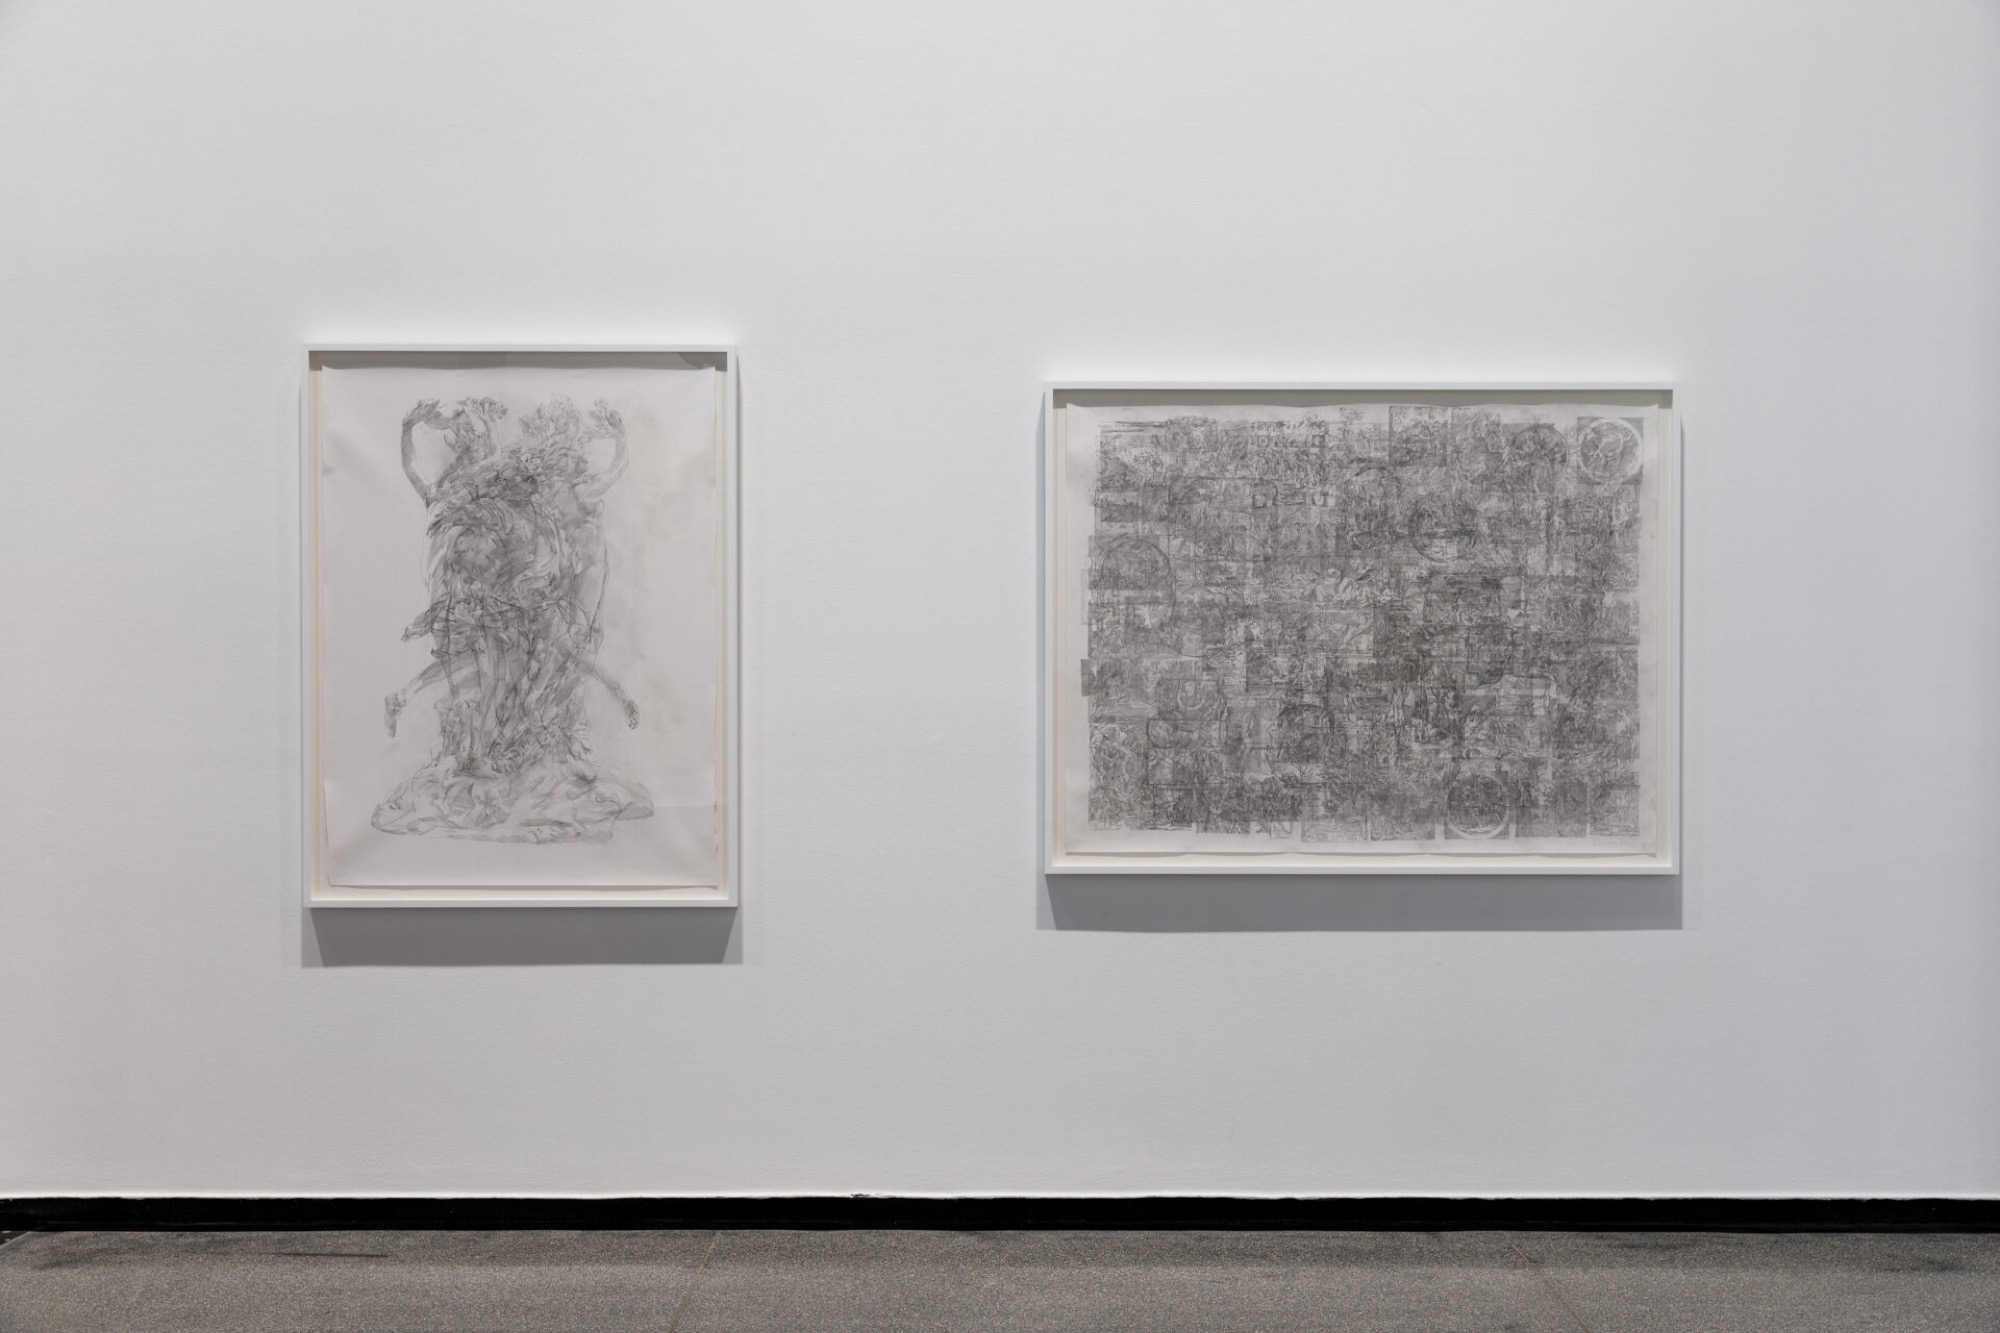 Ciprian Mureșan, Drawing after ‘Apollo and Daphne’ by Bernini photographed from different angles, 2021. Pencil on paper, 132.0 x 99.0 cm, Drawing after a selection of representations of Daphne from the archive of the Warburg Institute, 2021, Pencil on paper, 114.0 x 150.0 cm. Courtesy the artist and Galeria Plan B, Berlin. Photograph: Andrew Curtis